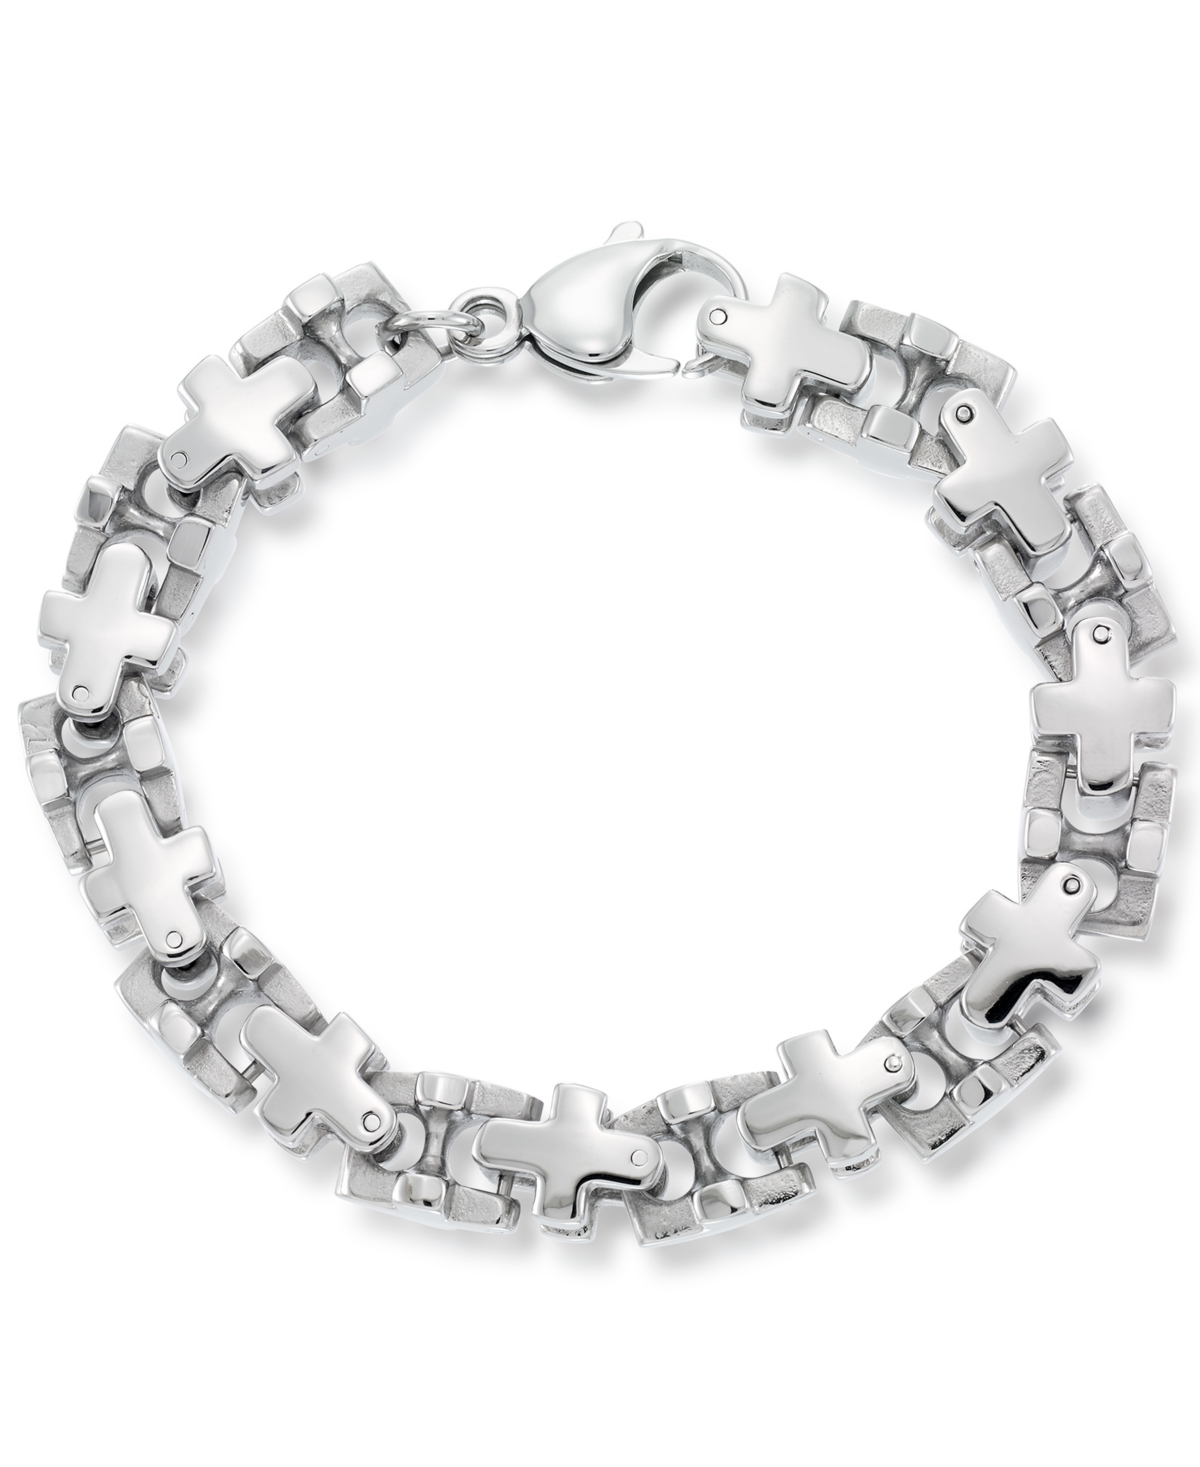 Andrew Charles by Andy Hilfiger Men's Cross Link Bracelet in Stainless Steel